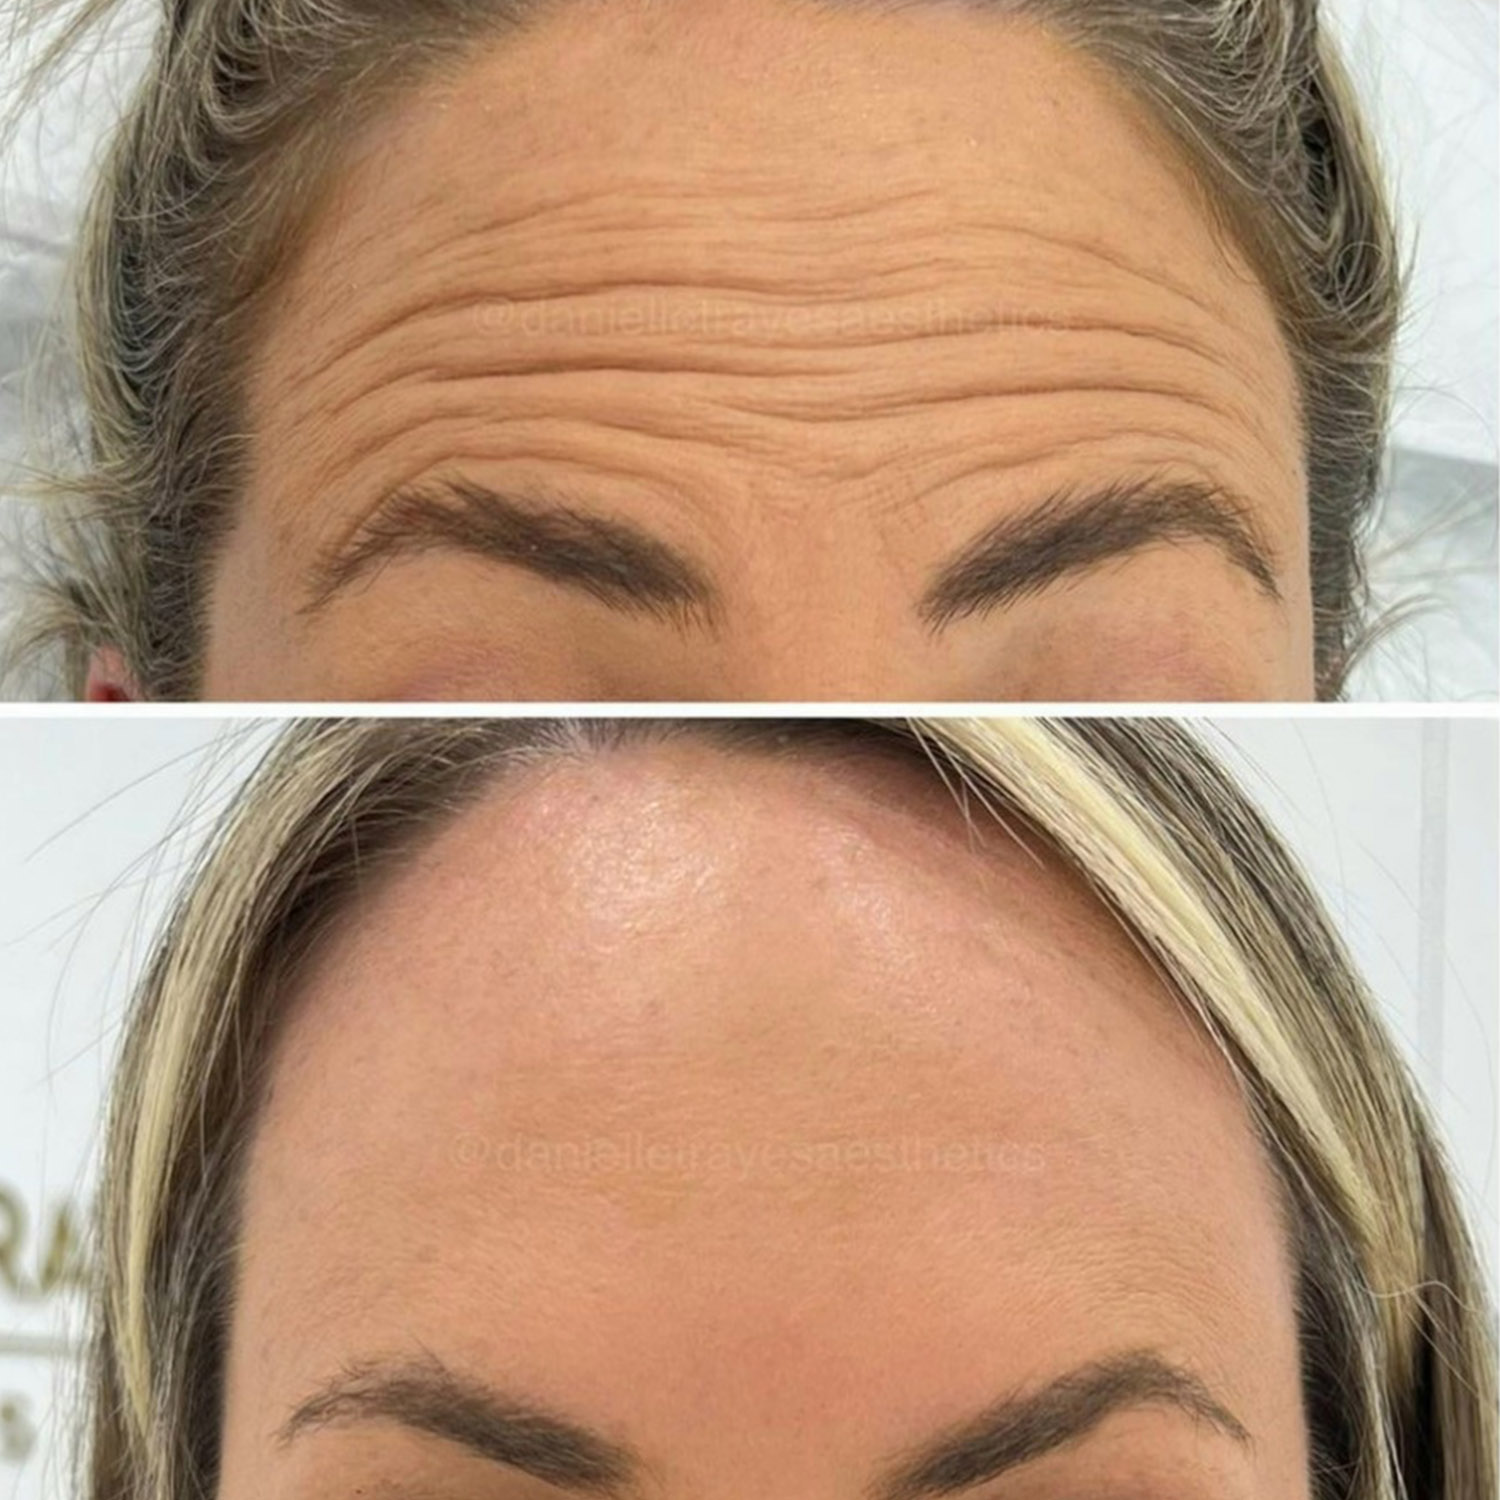 Anti Wrinkle Injections and Dermal Fillers Treatment using cutting edge products and technique at Rejuvenate Laser & Skin Clinic